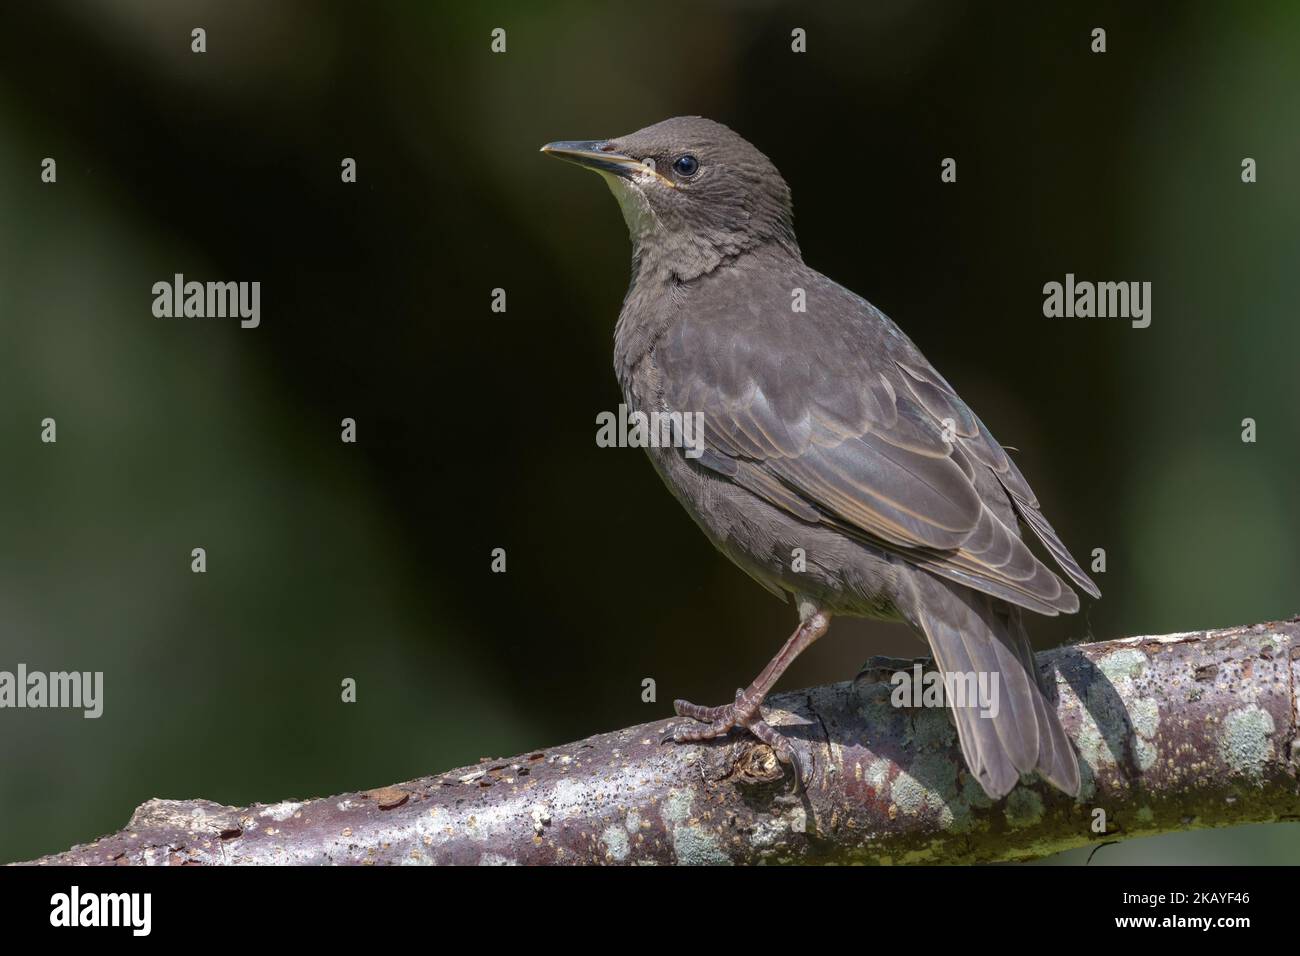 Young Common starling (Sturnus vulgaris) looking bravely while posing on a stick with dark background Stock Photo